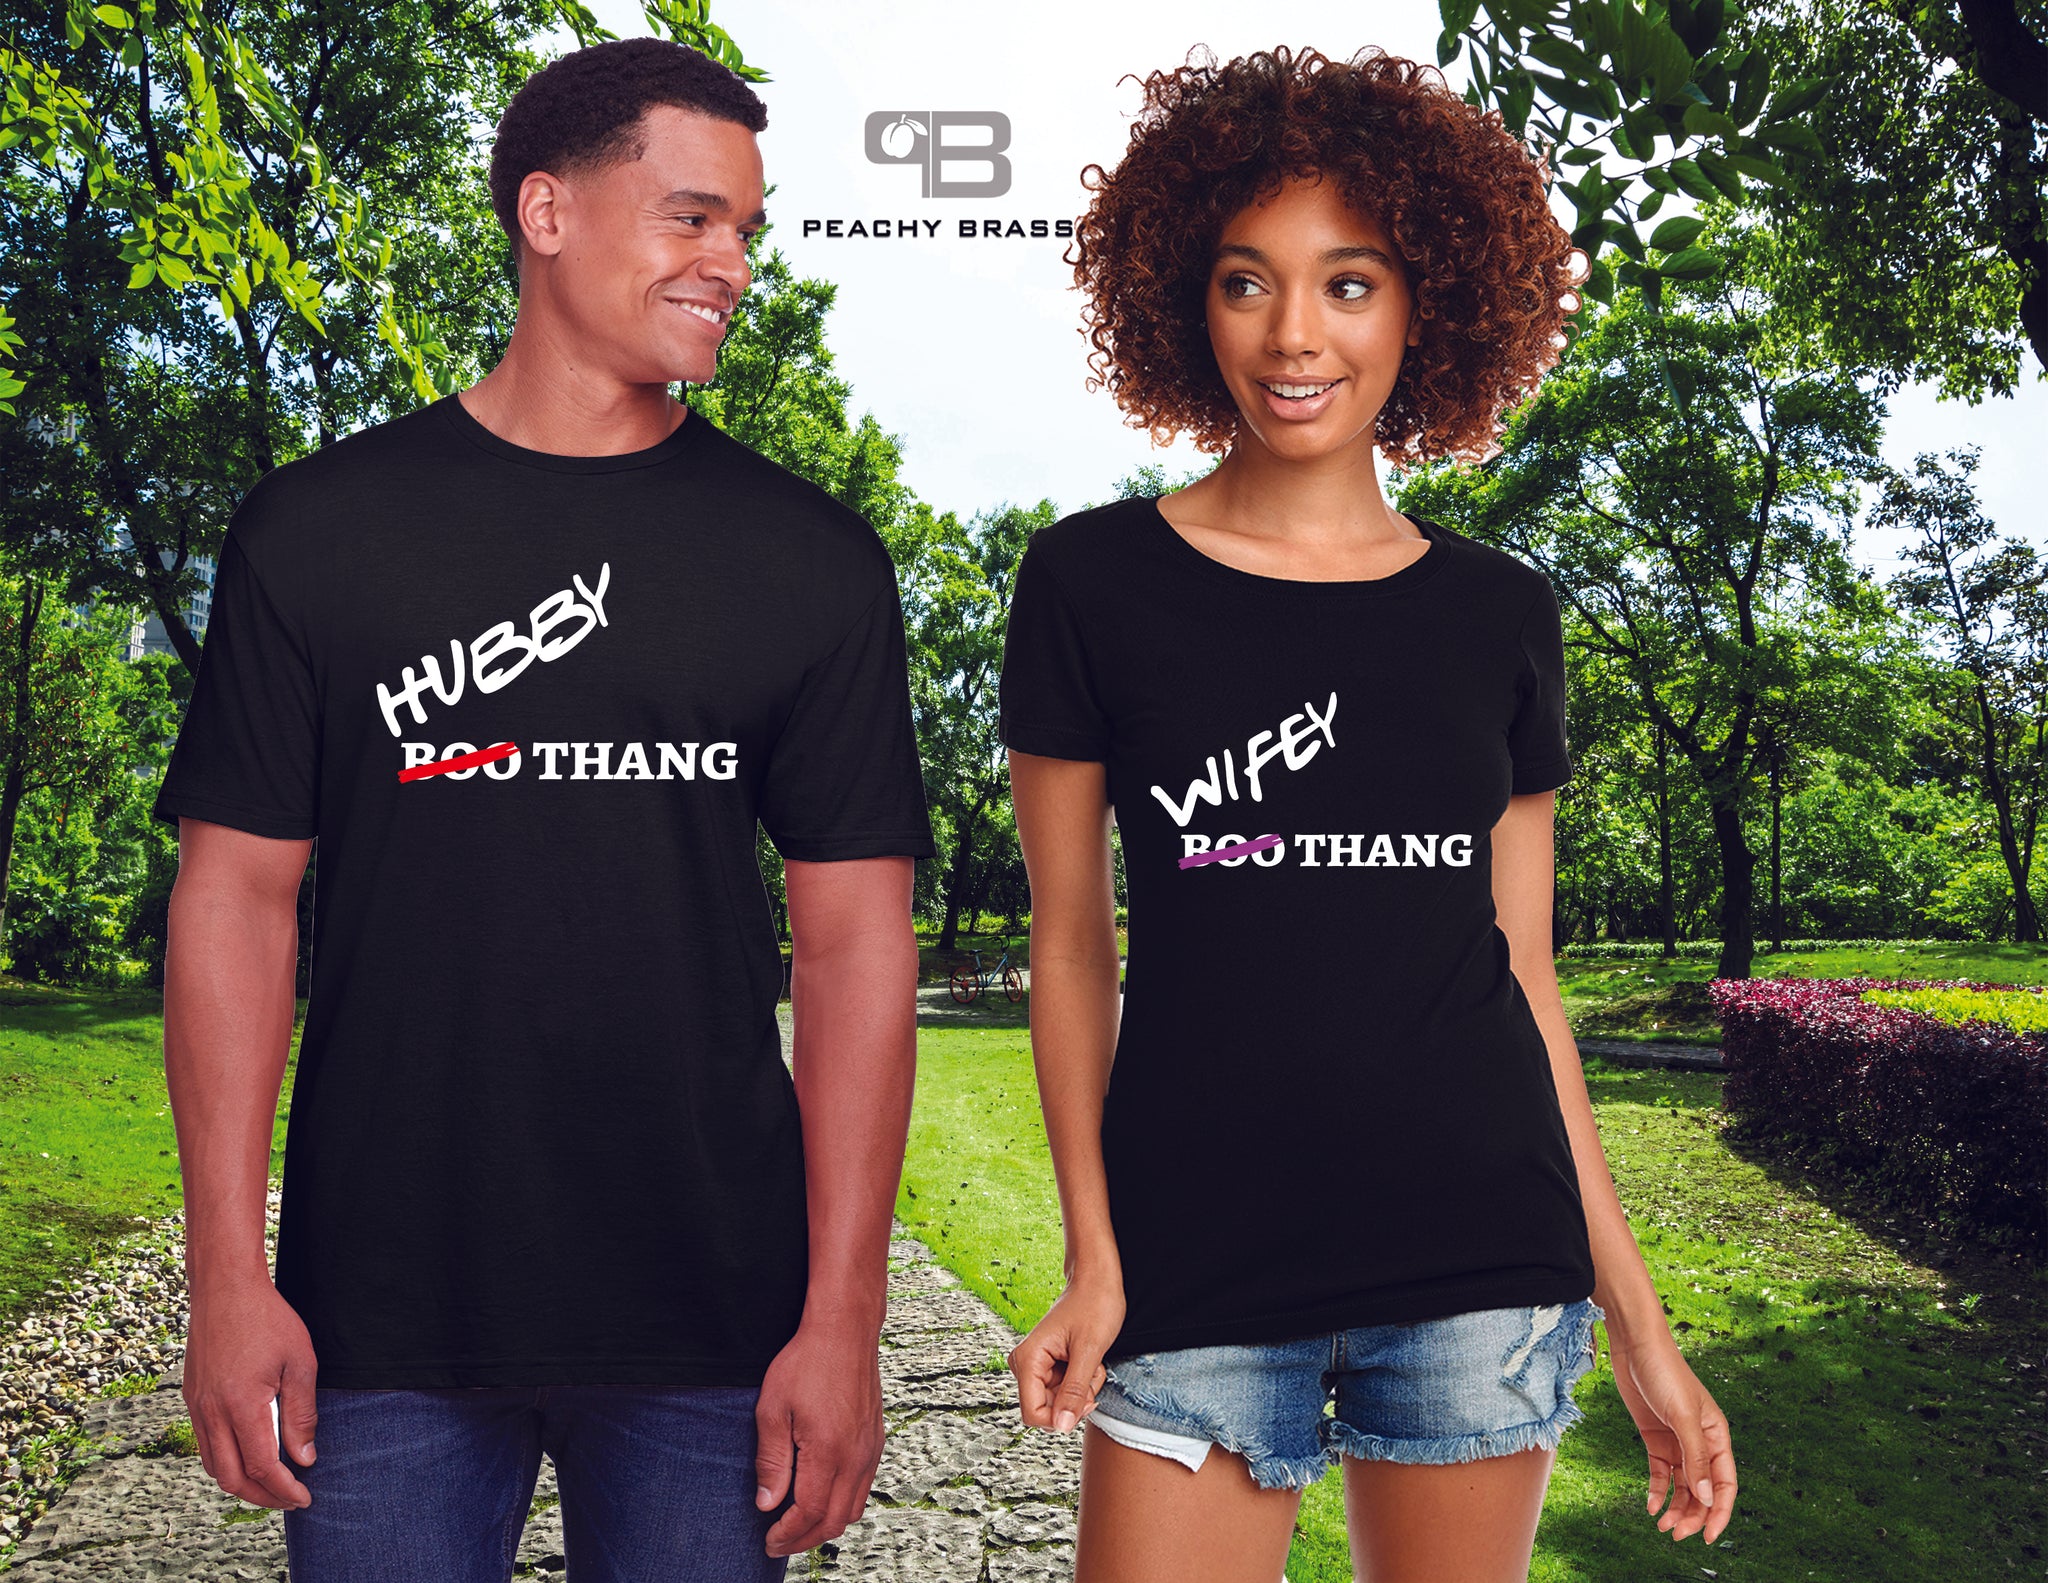 Boo (HUBBY WIFEY) Thang Couples Shirt - Peachy Brass